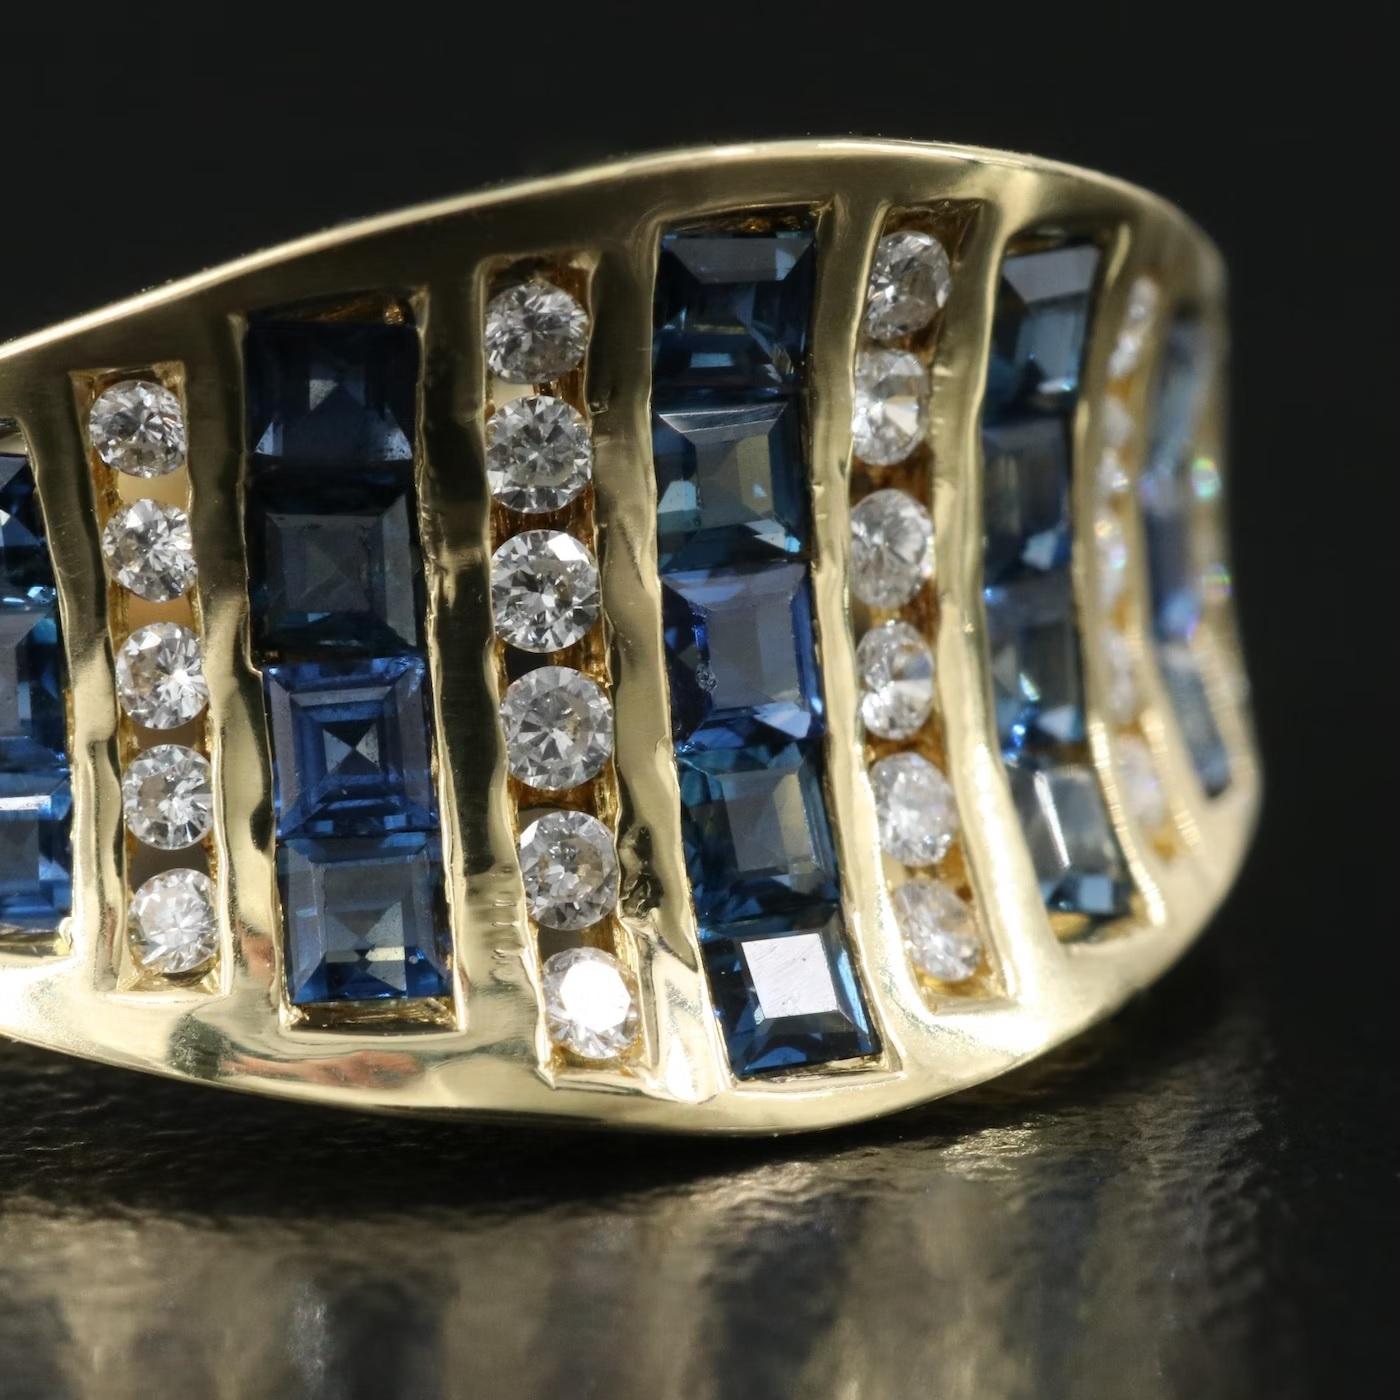 Italian Designer ring  -  RIMANI -  Stamped R
MADE IN ITALY
NEW WITH TAGS, Tag Price $6500

Diamond and Blue Sapphire, All natural and Excellent Quality 

18K Yellow gold, stamped 18K

Concave 3D design

Head turner, statement piece. 

The ring is